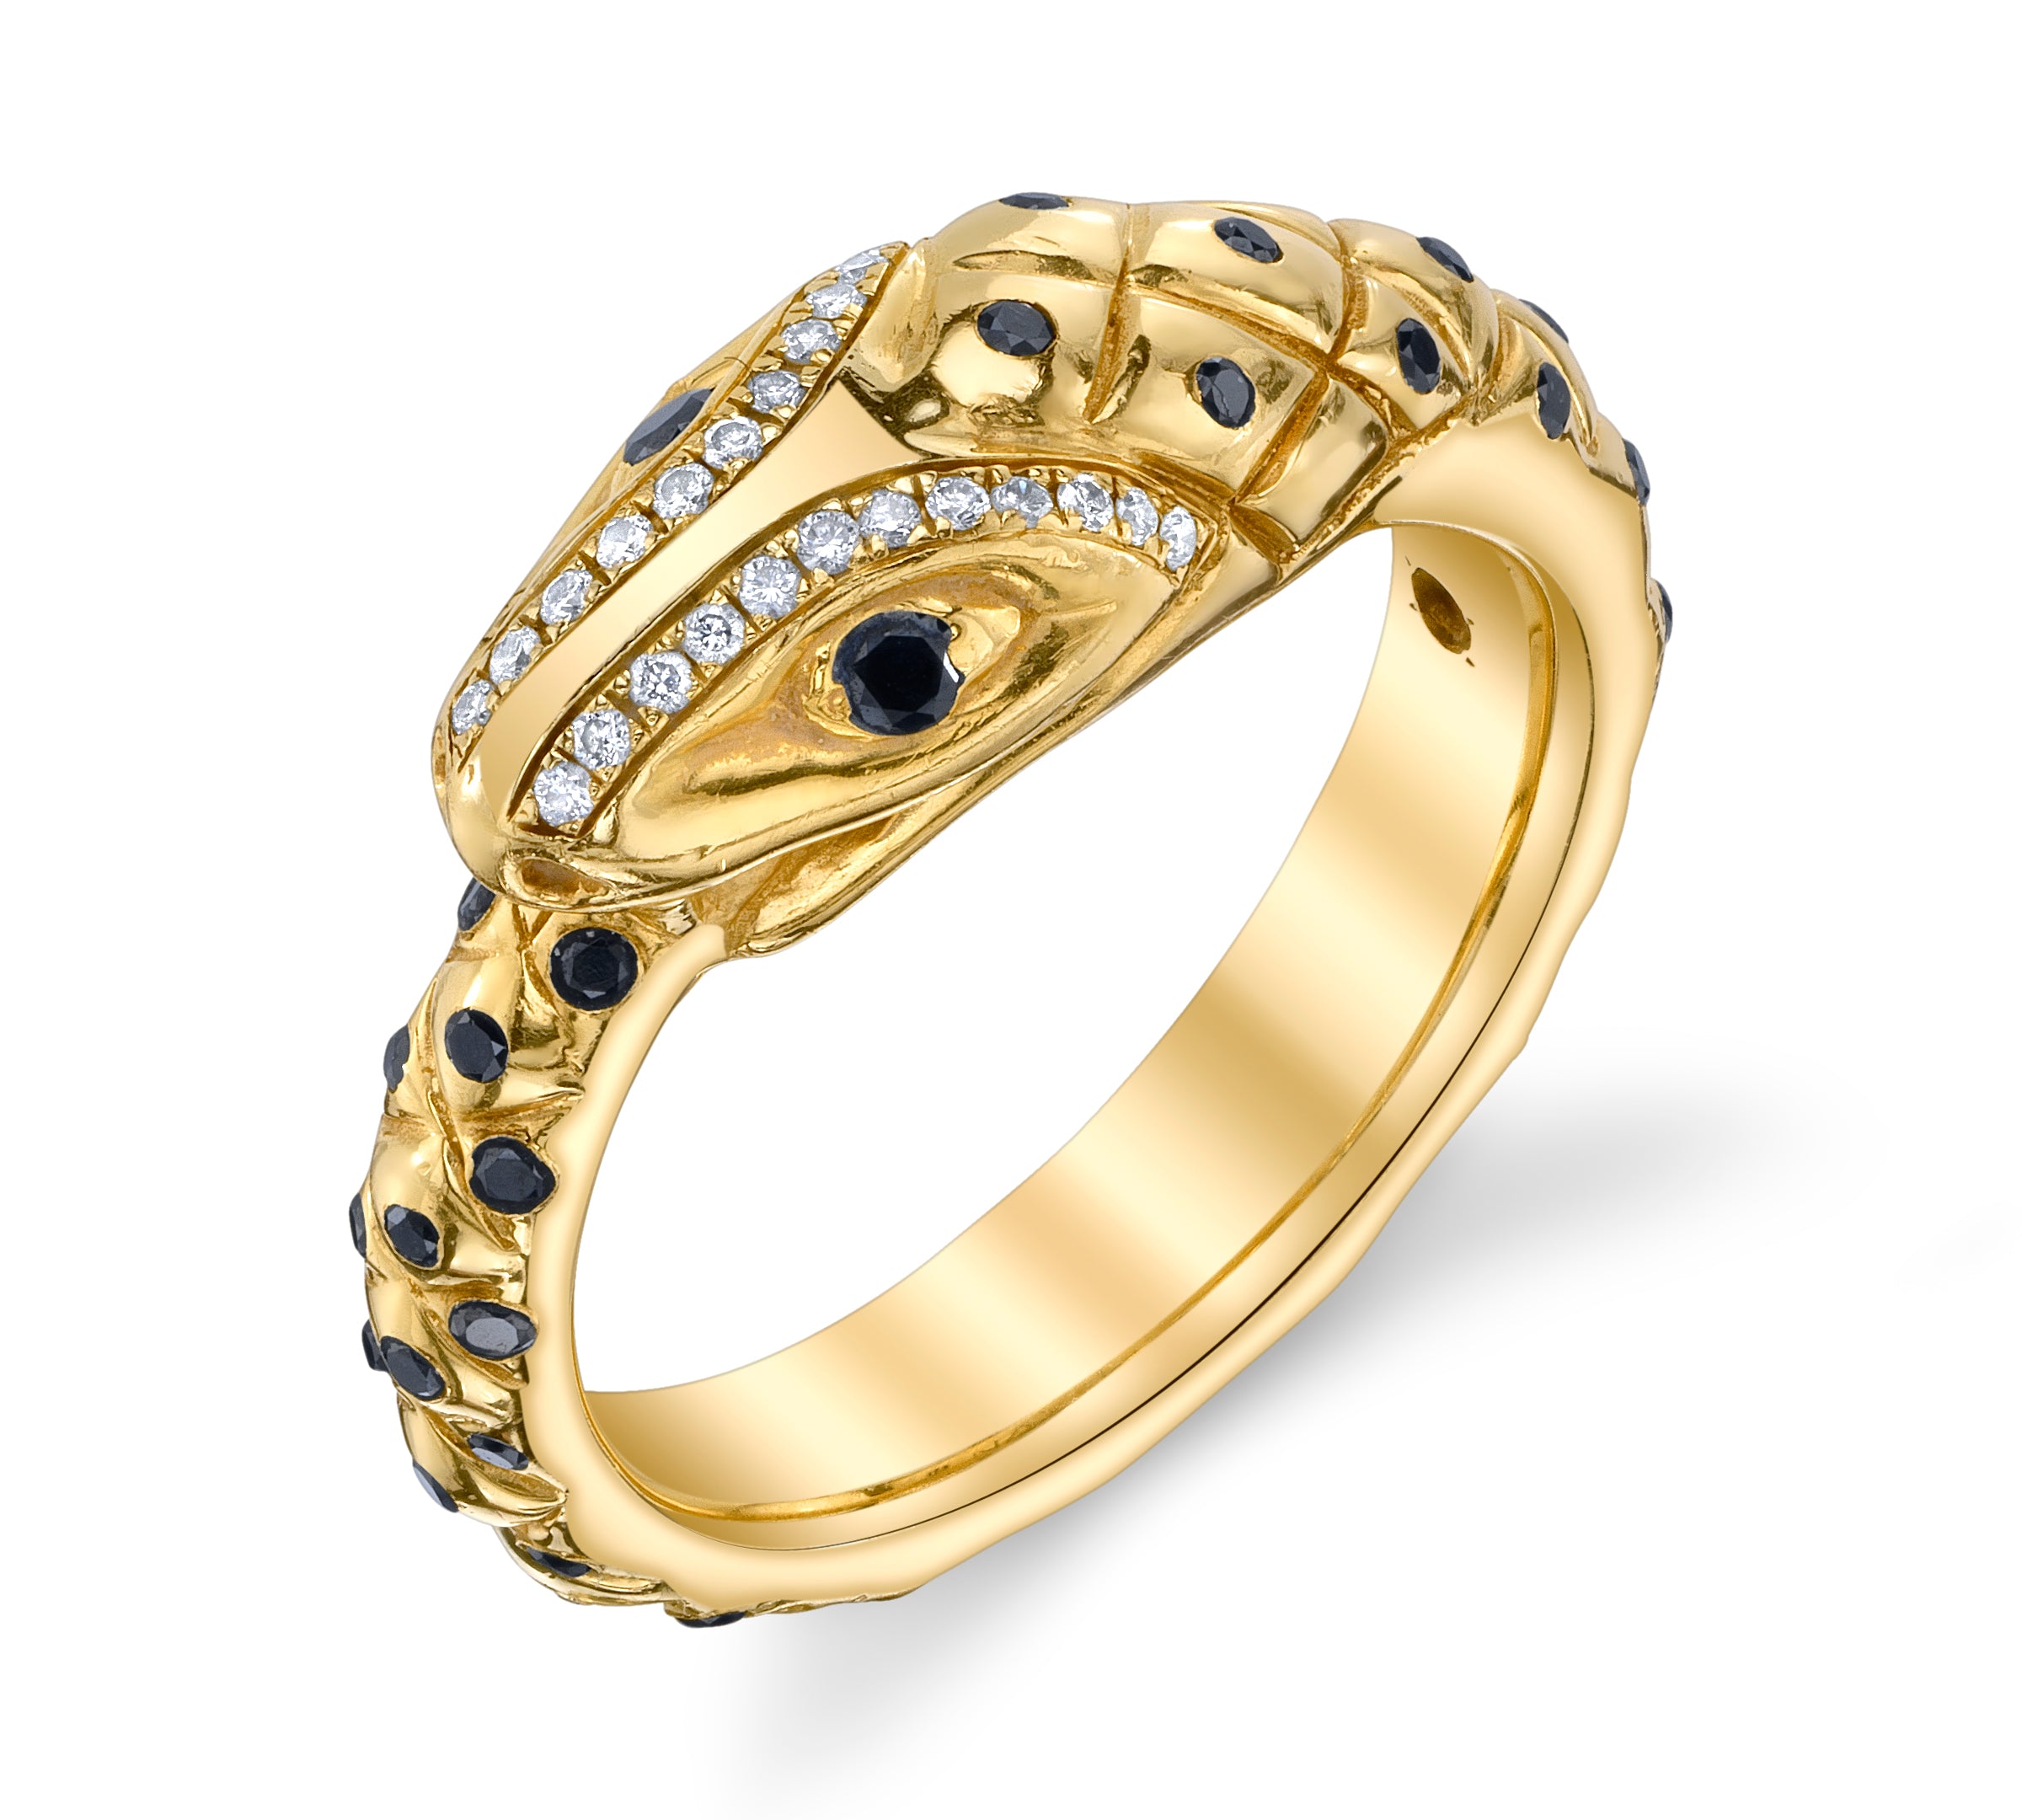 Ouroboros Ring, Yellow Gold and Black Diamond Cocktail Ring House of RAVN   